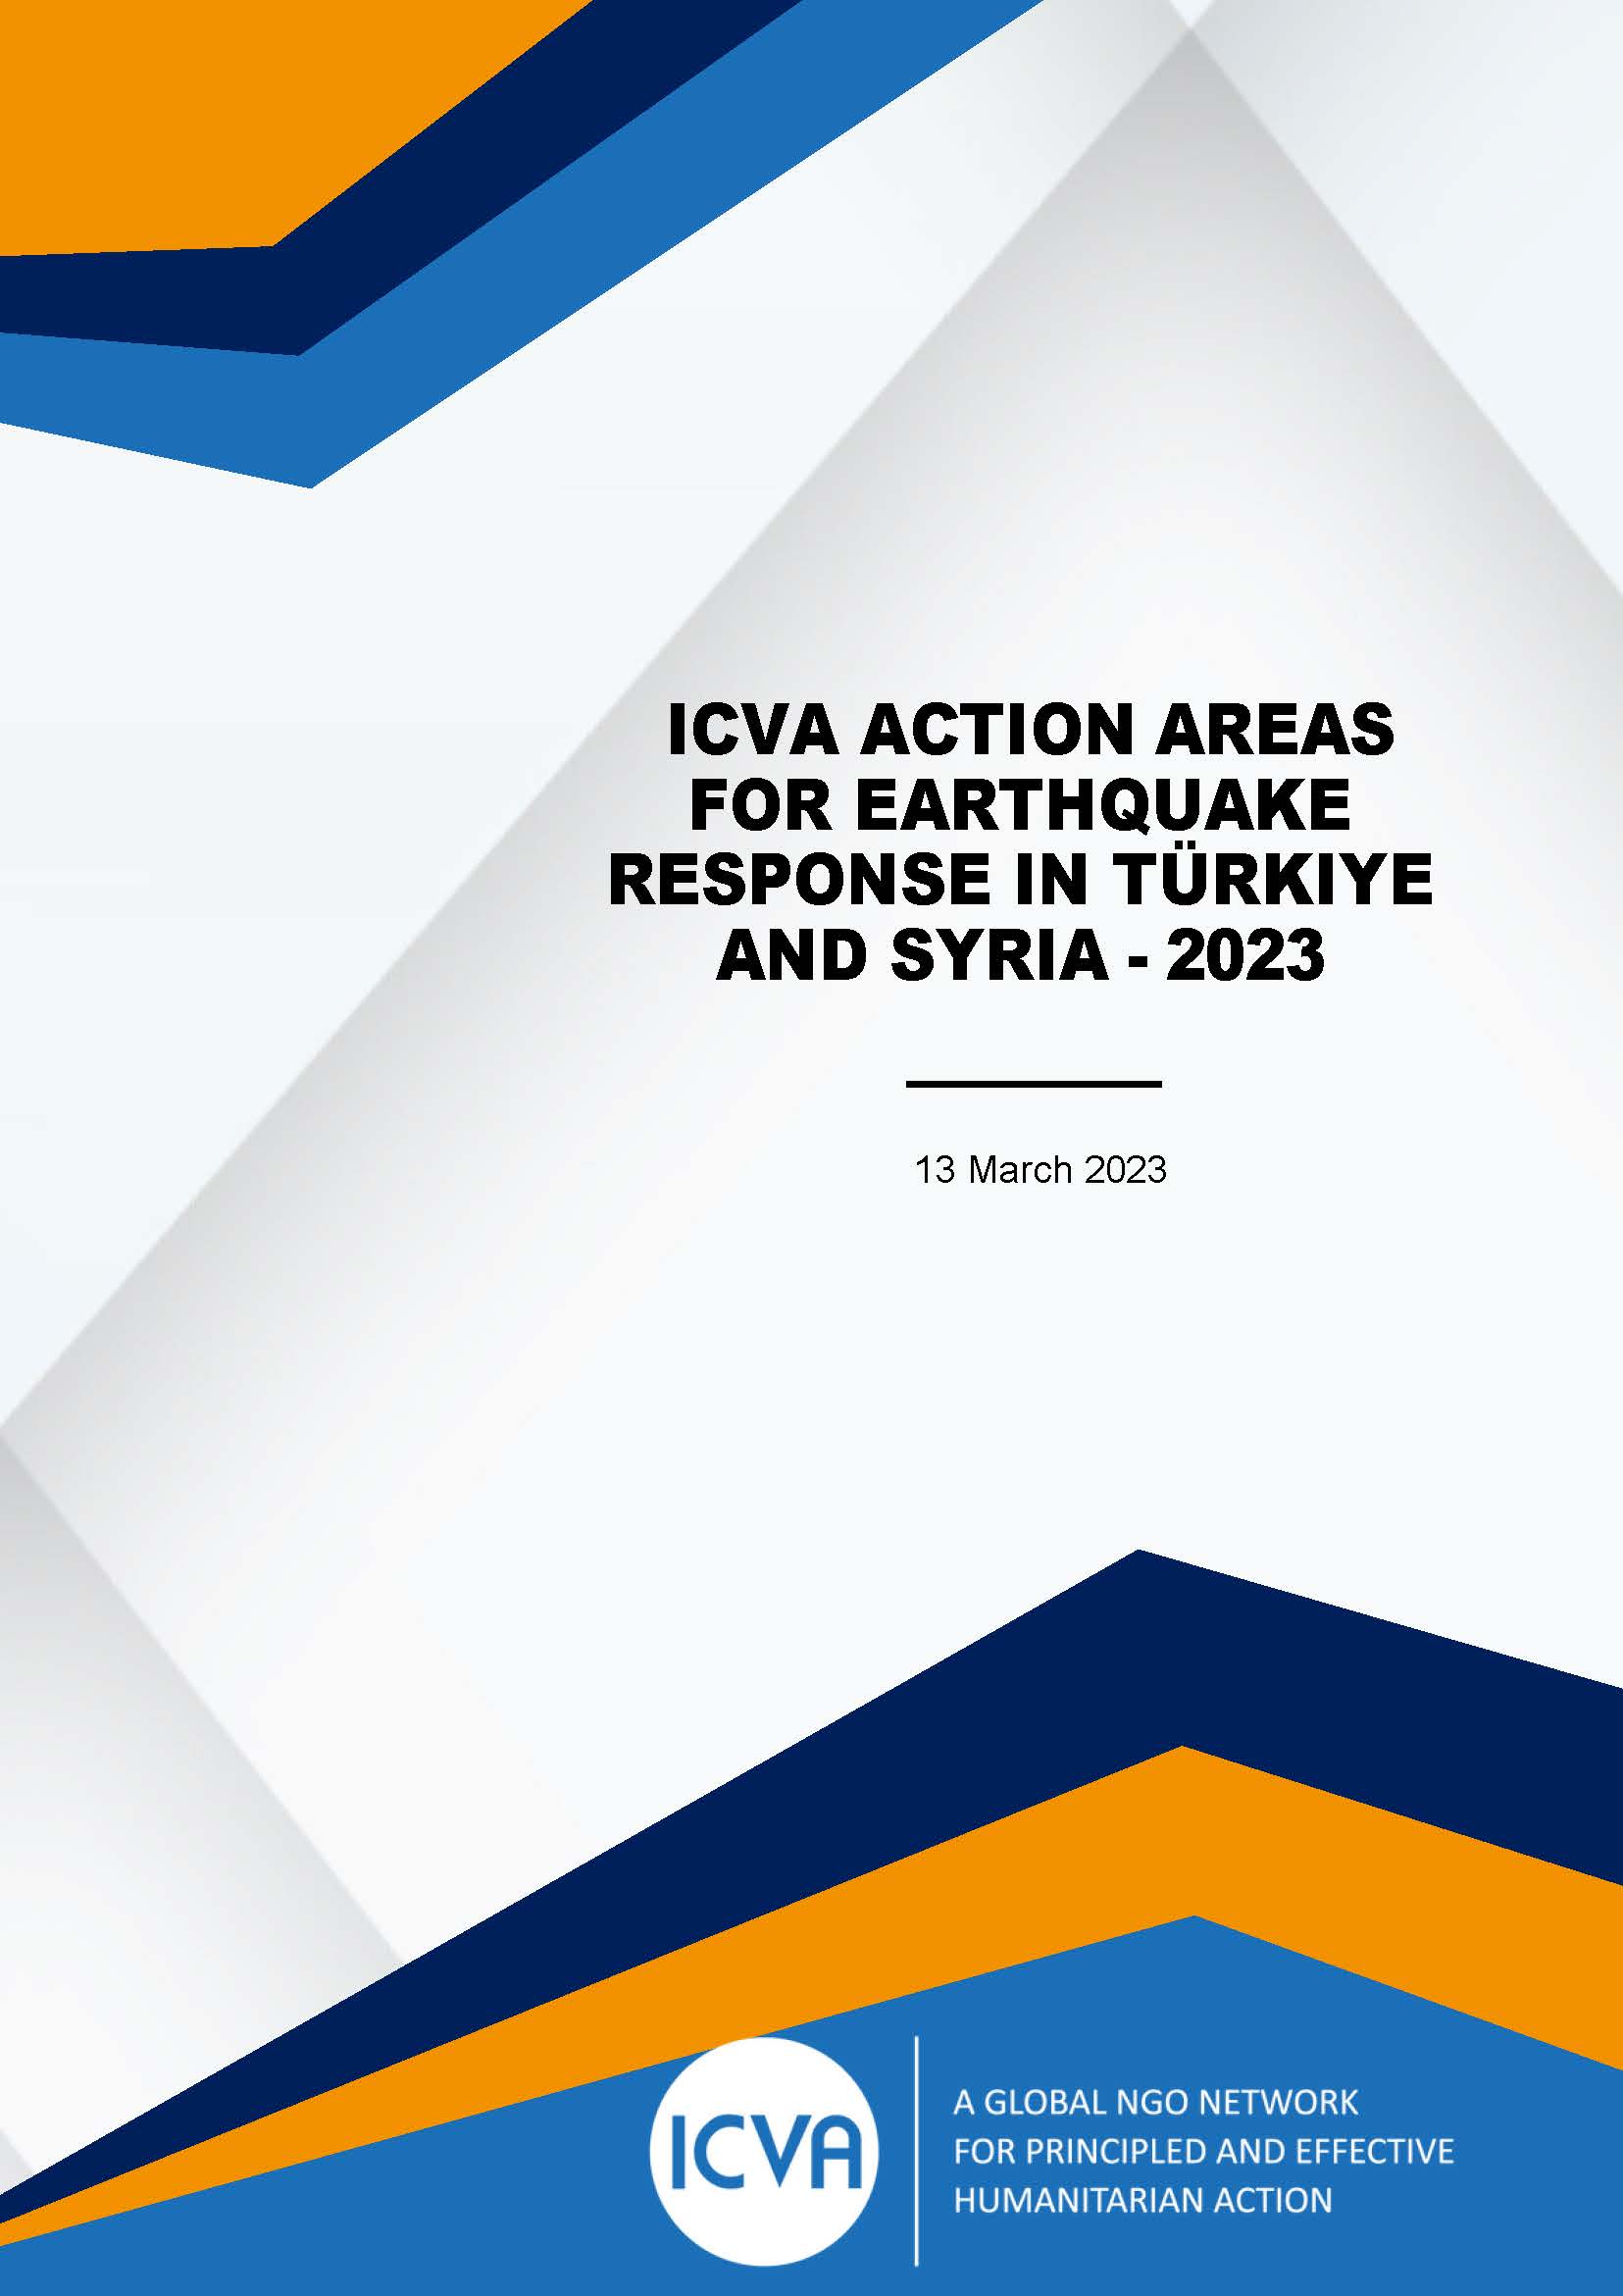 ICVA Action Areas for Earthquanse in Türkiye and Syria- 2023